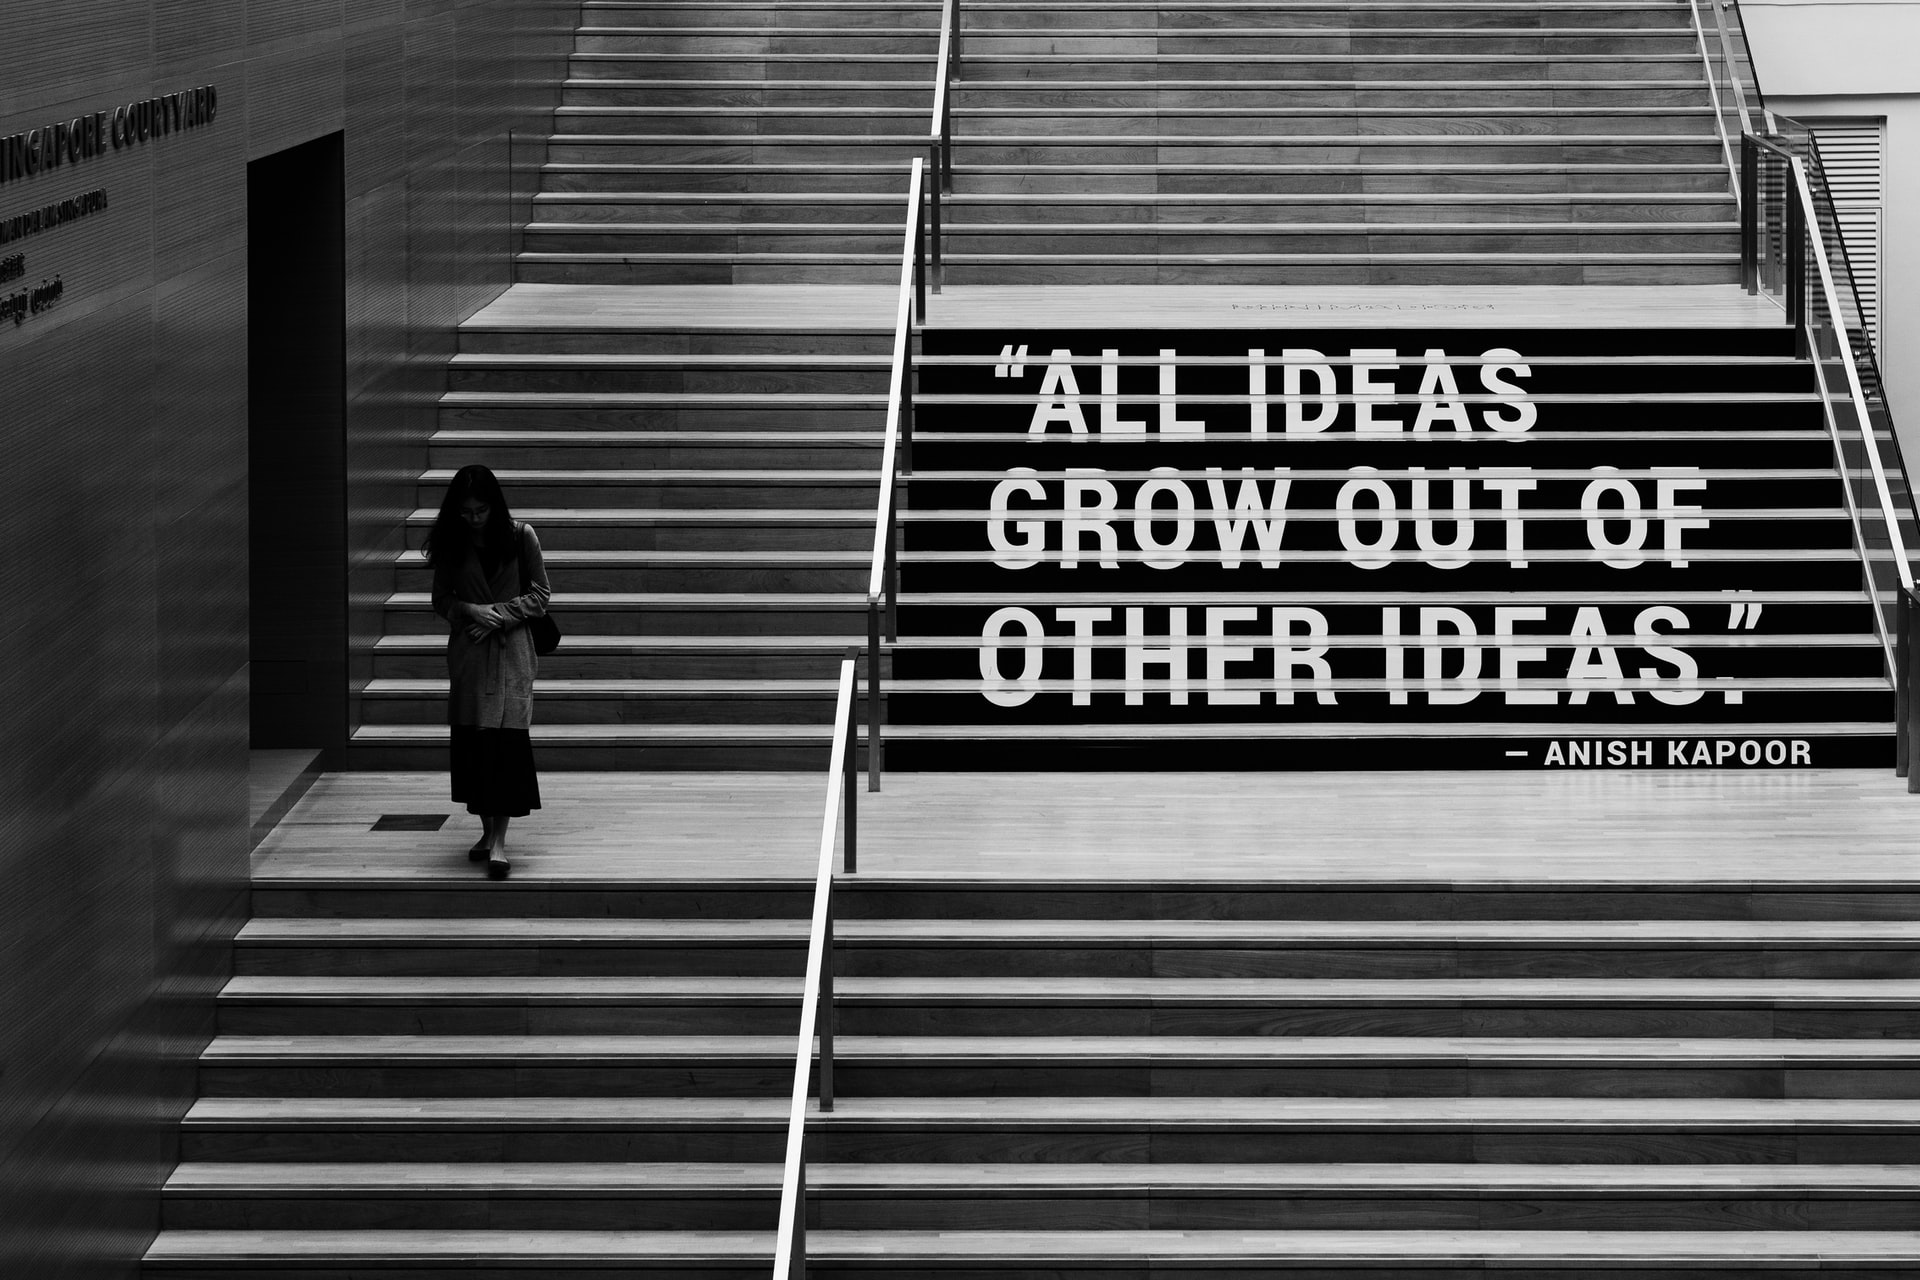 「All ideas grow out of other ideas」が表記された階段